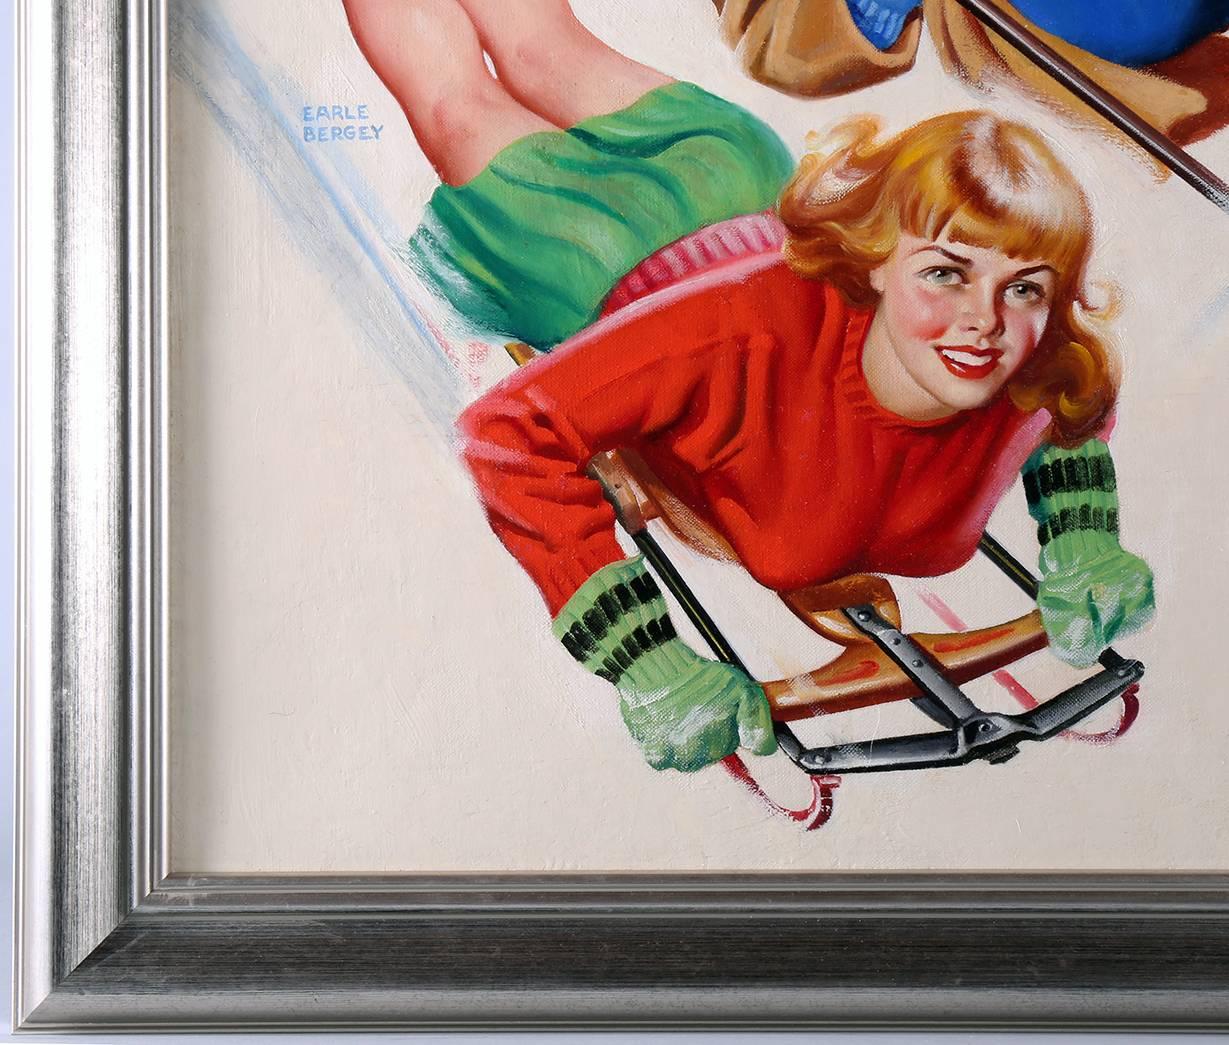 This fresh to the market lively cover painting by Earle K. Bergey appeared as the cover of the winter 1948 issue of the Better Publications title Cartoon Humor. A breezy co-ed pin-up girl in a form fitting red sweater enjoys a snowy sled ride